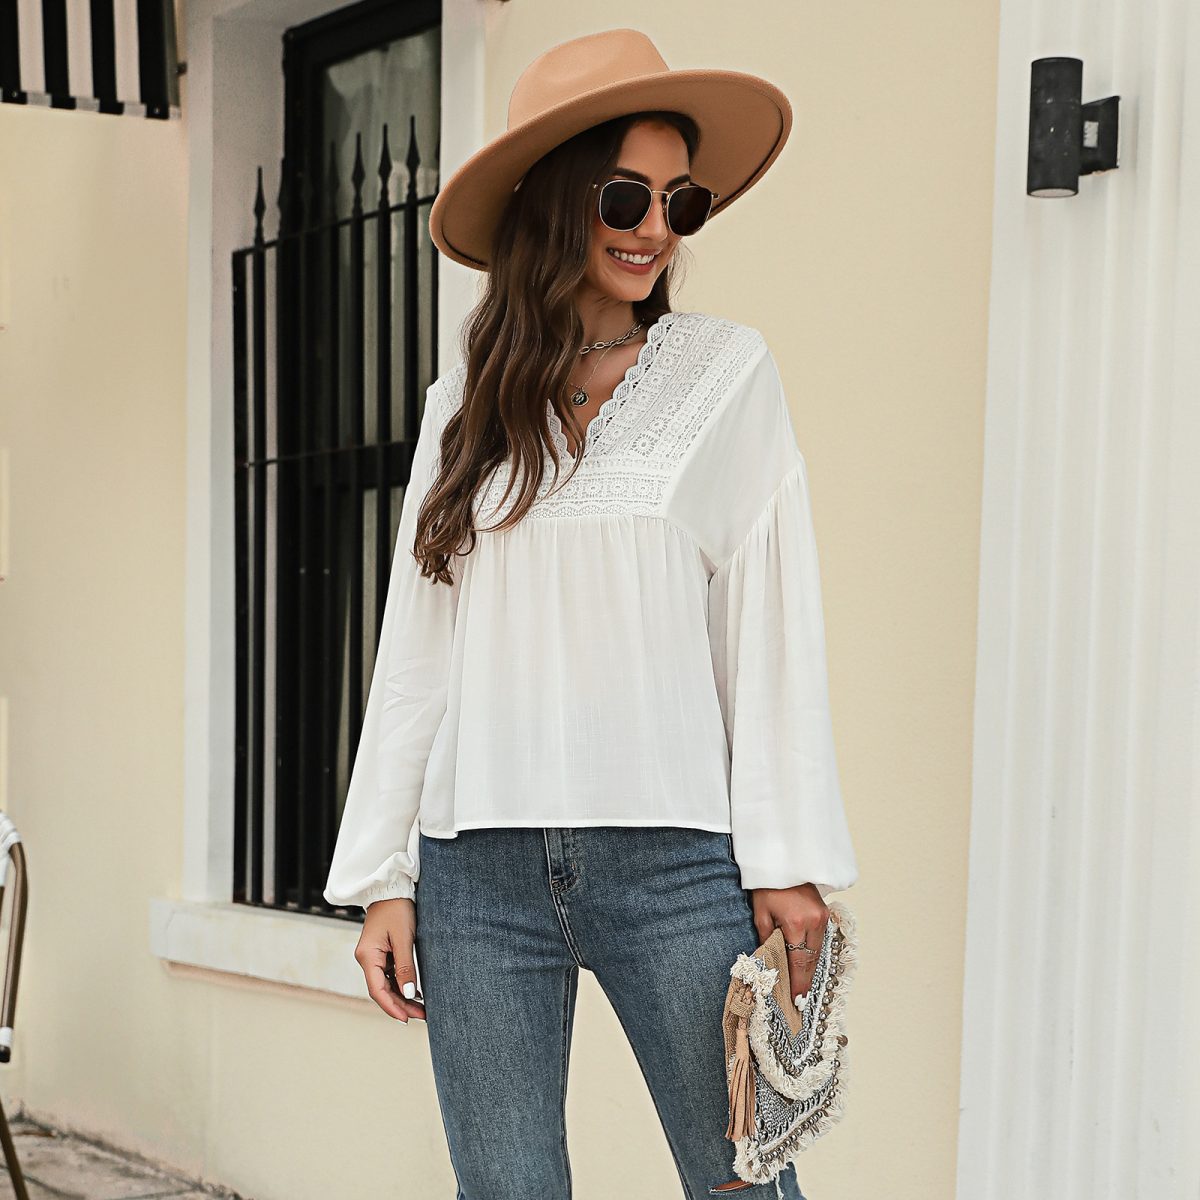 Solid Color Lantern Sleeve Chiffon Shirt in Blouses & Shirts